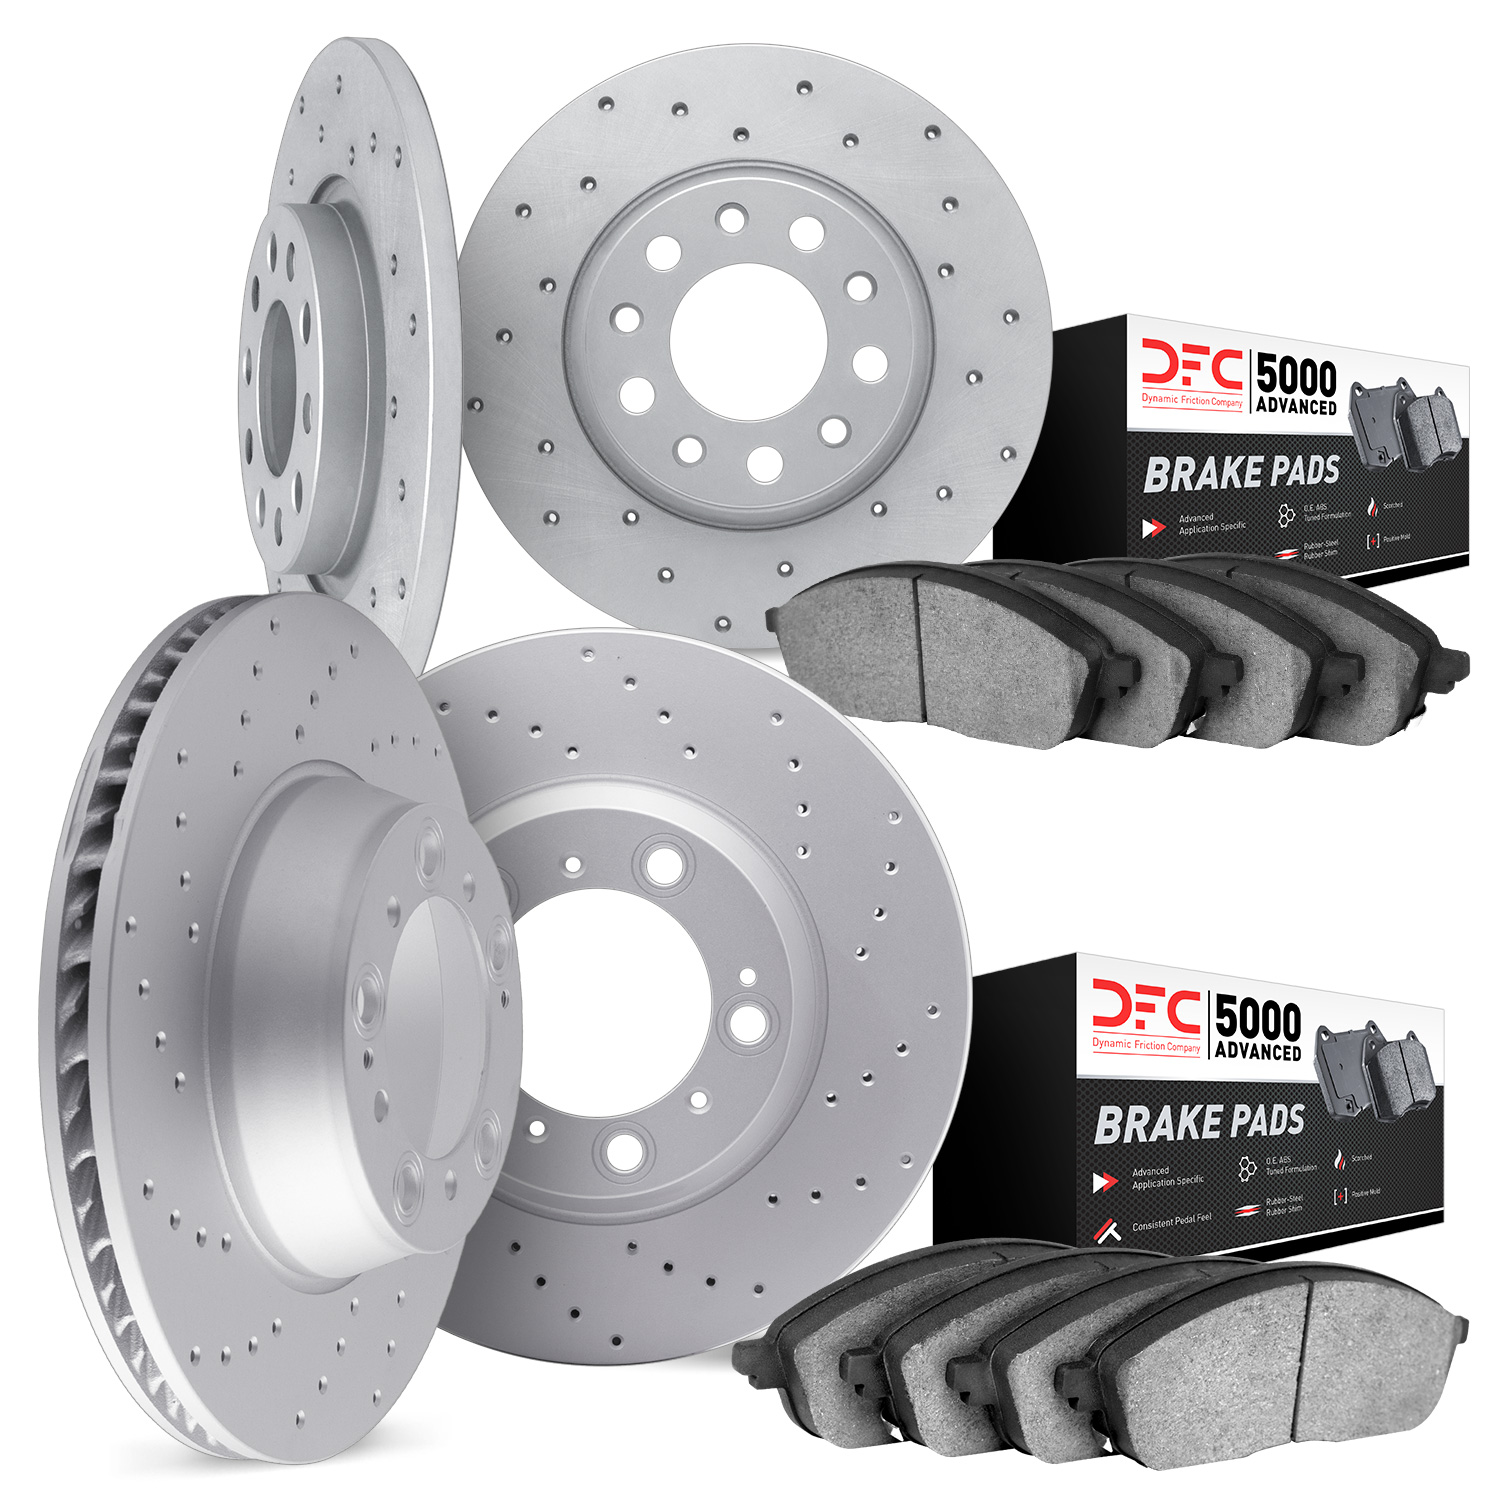 2704-80021 Geoperformance Drilled Brake Rotors with Active Performance Pads Kit, 2006-2015 Ford/Lincoln/Mercury/Mazda, Position: